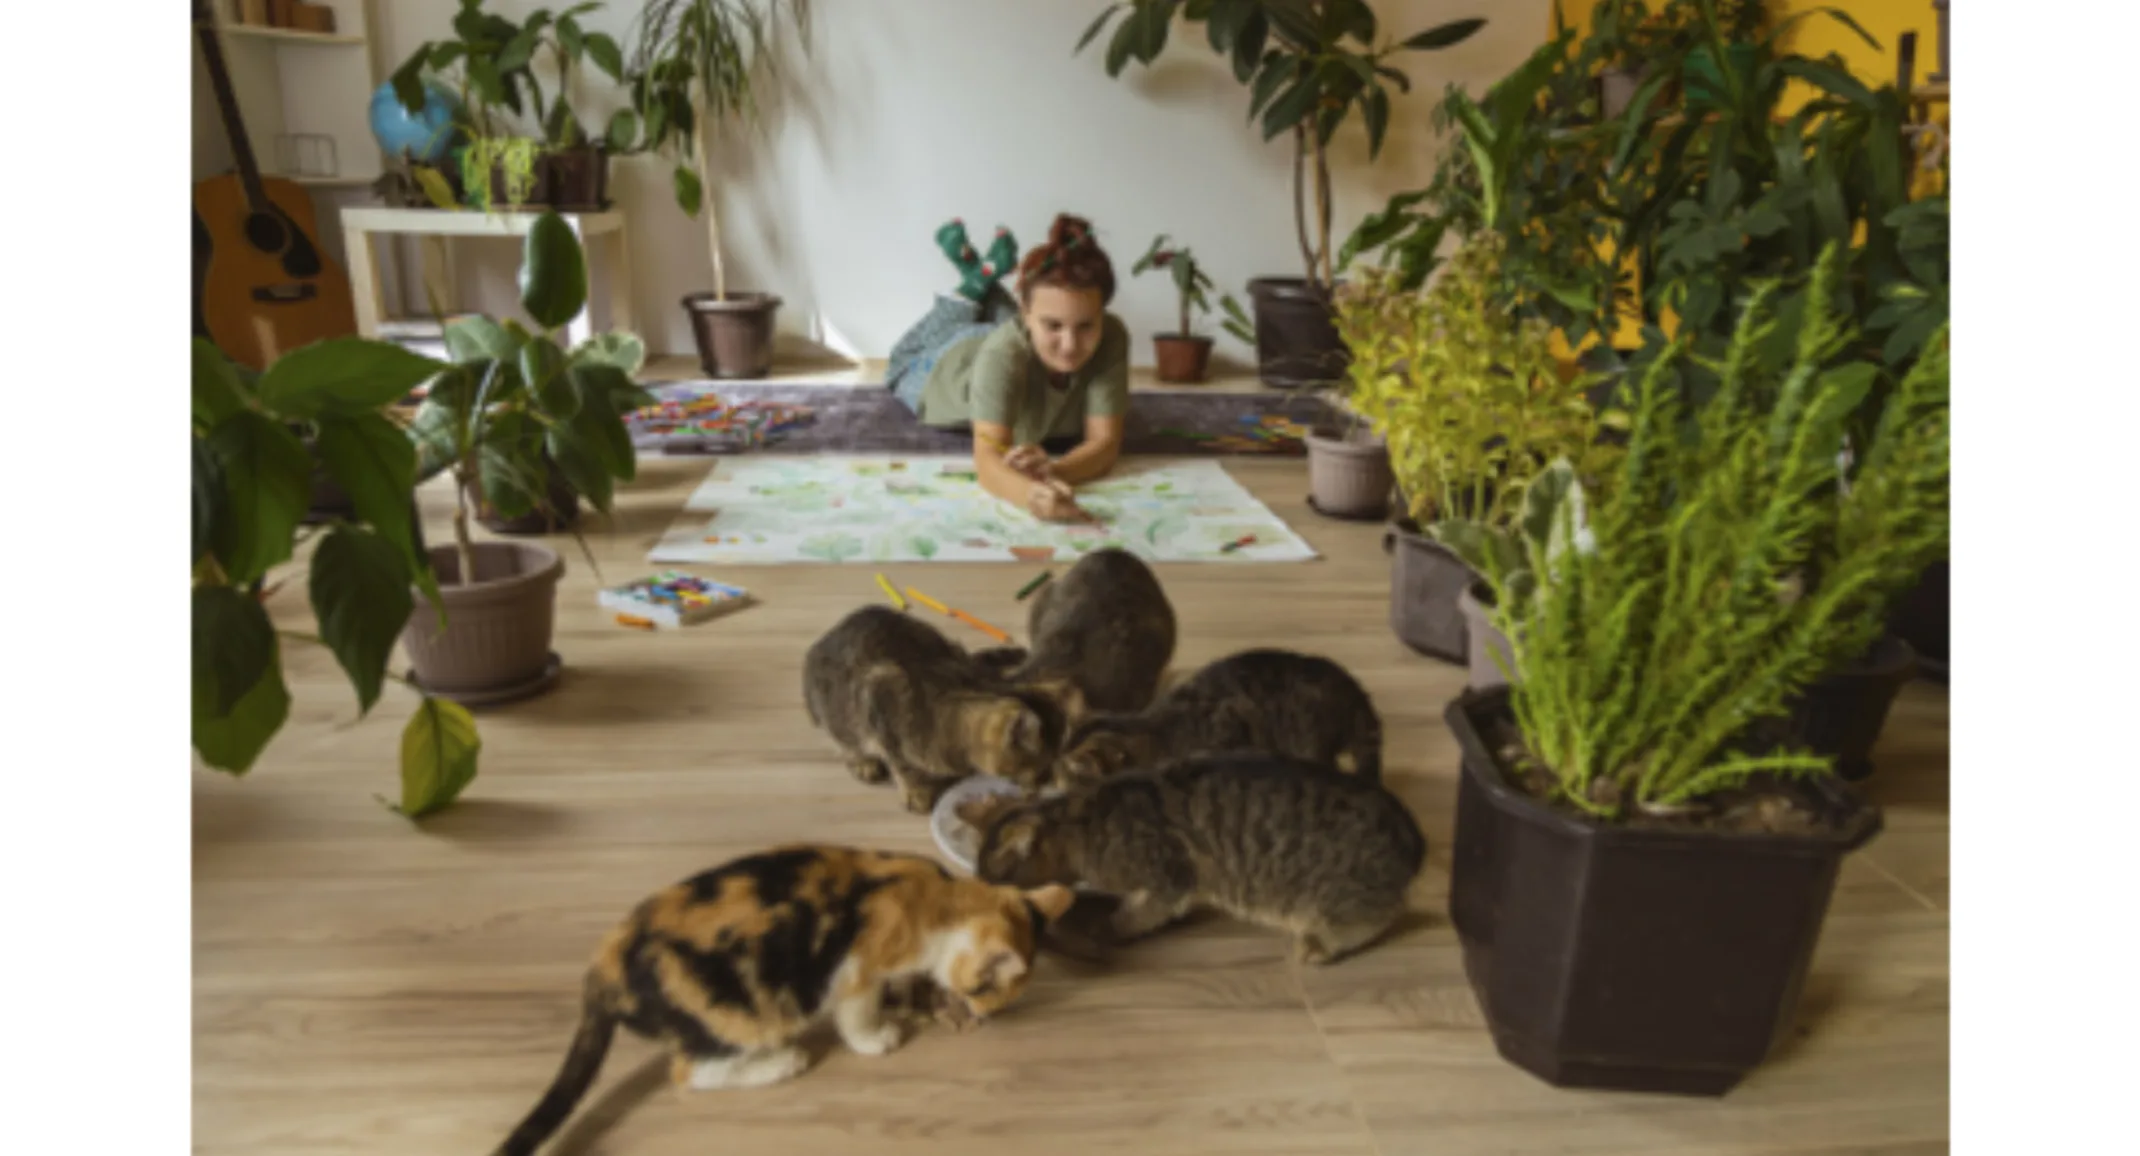 A girl drawing on the floor at home, next to her 5 cats